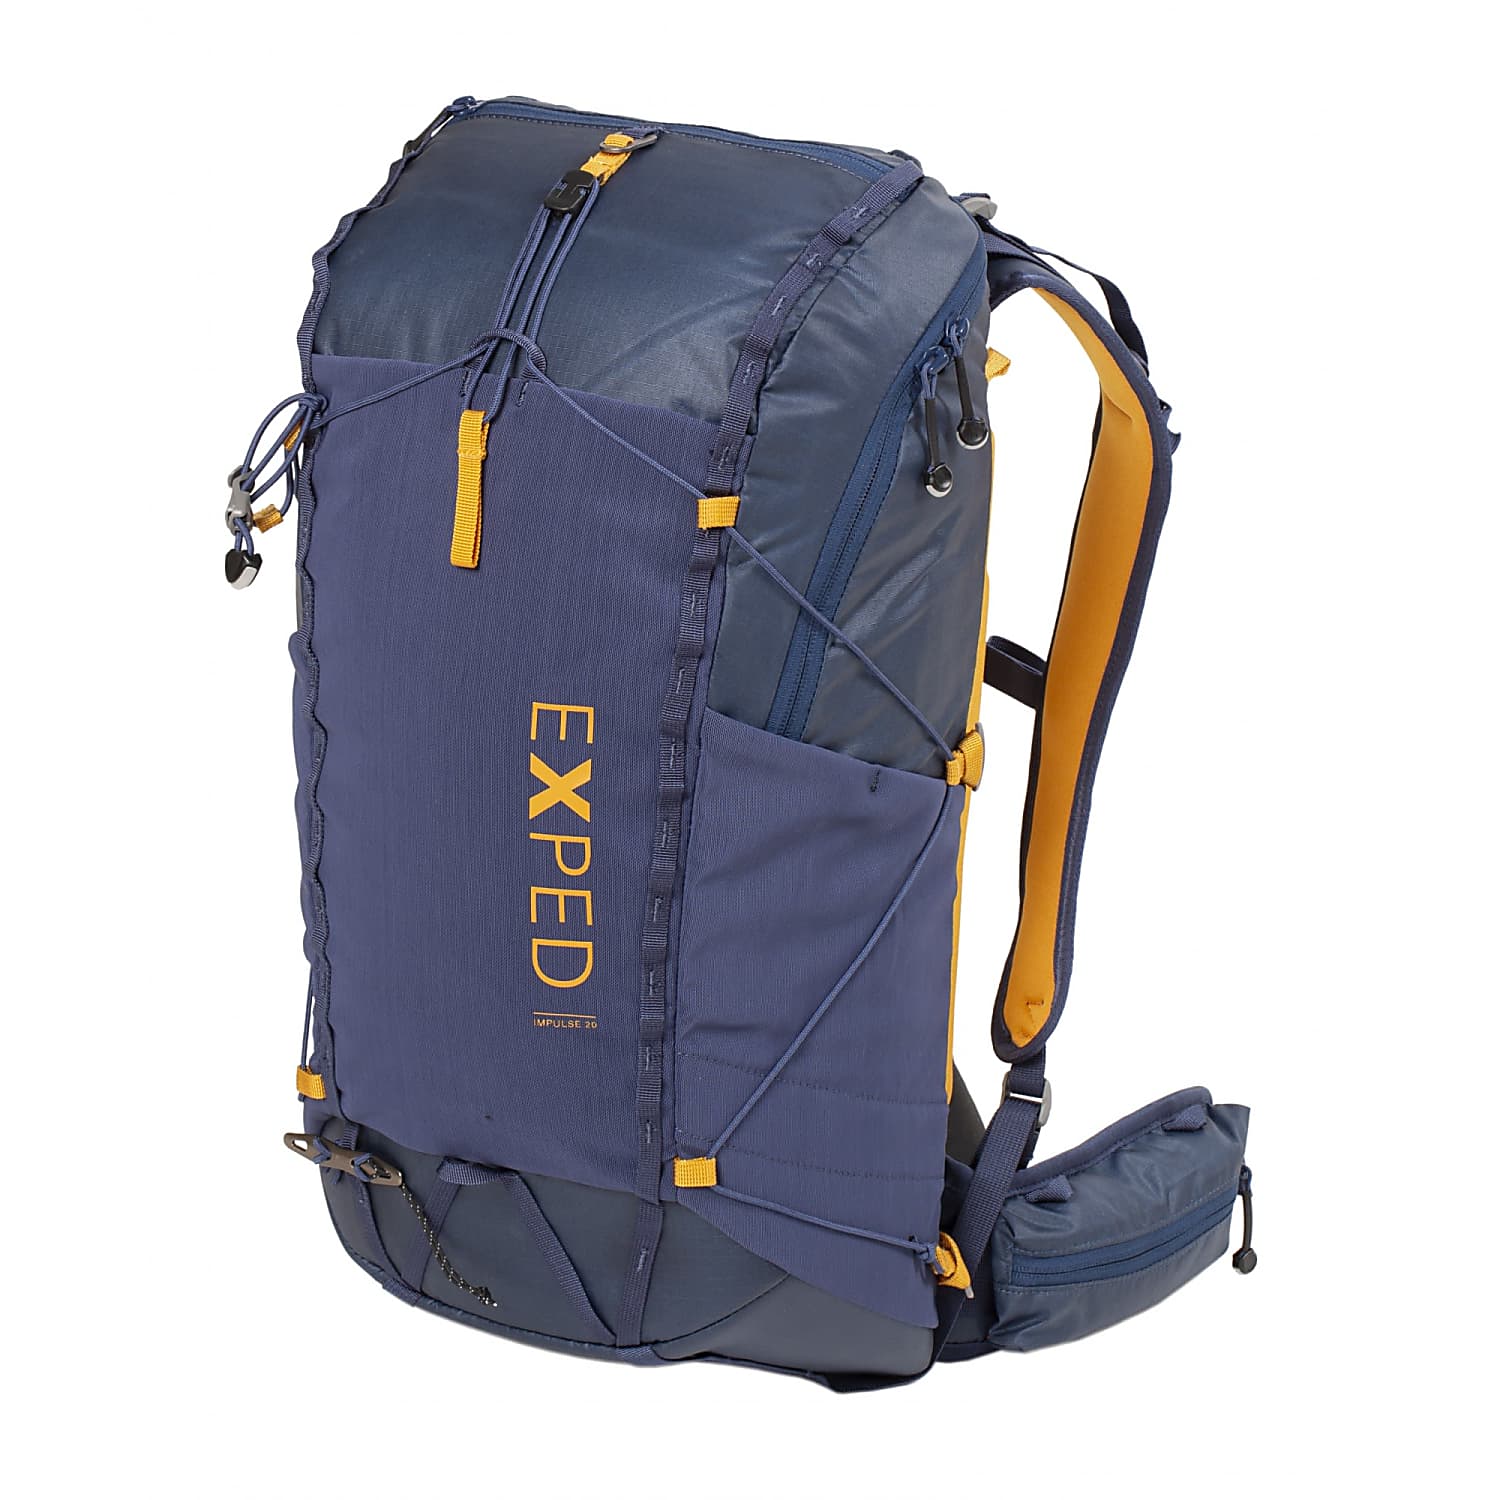 Exped Mini Belt Pouch - Navy